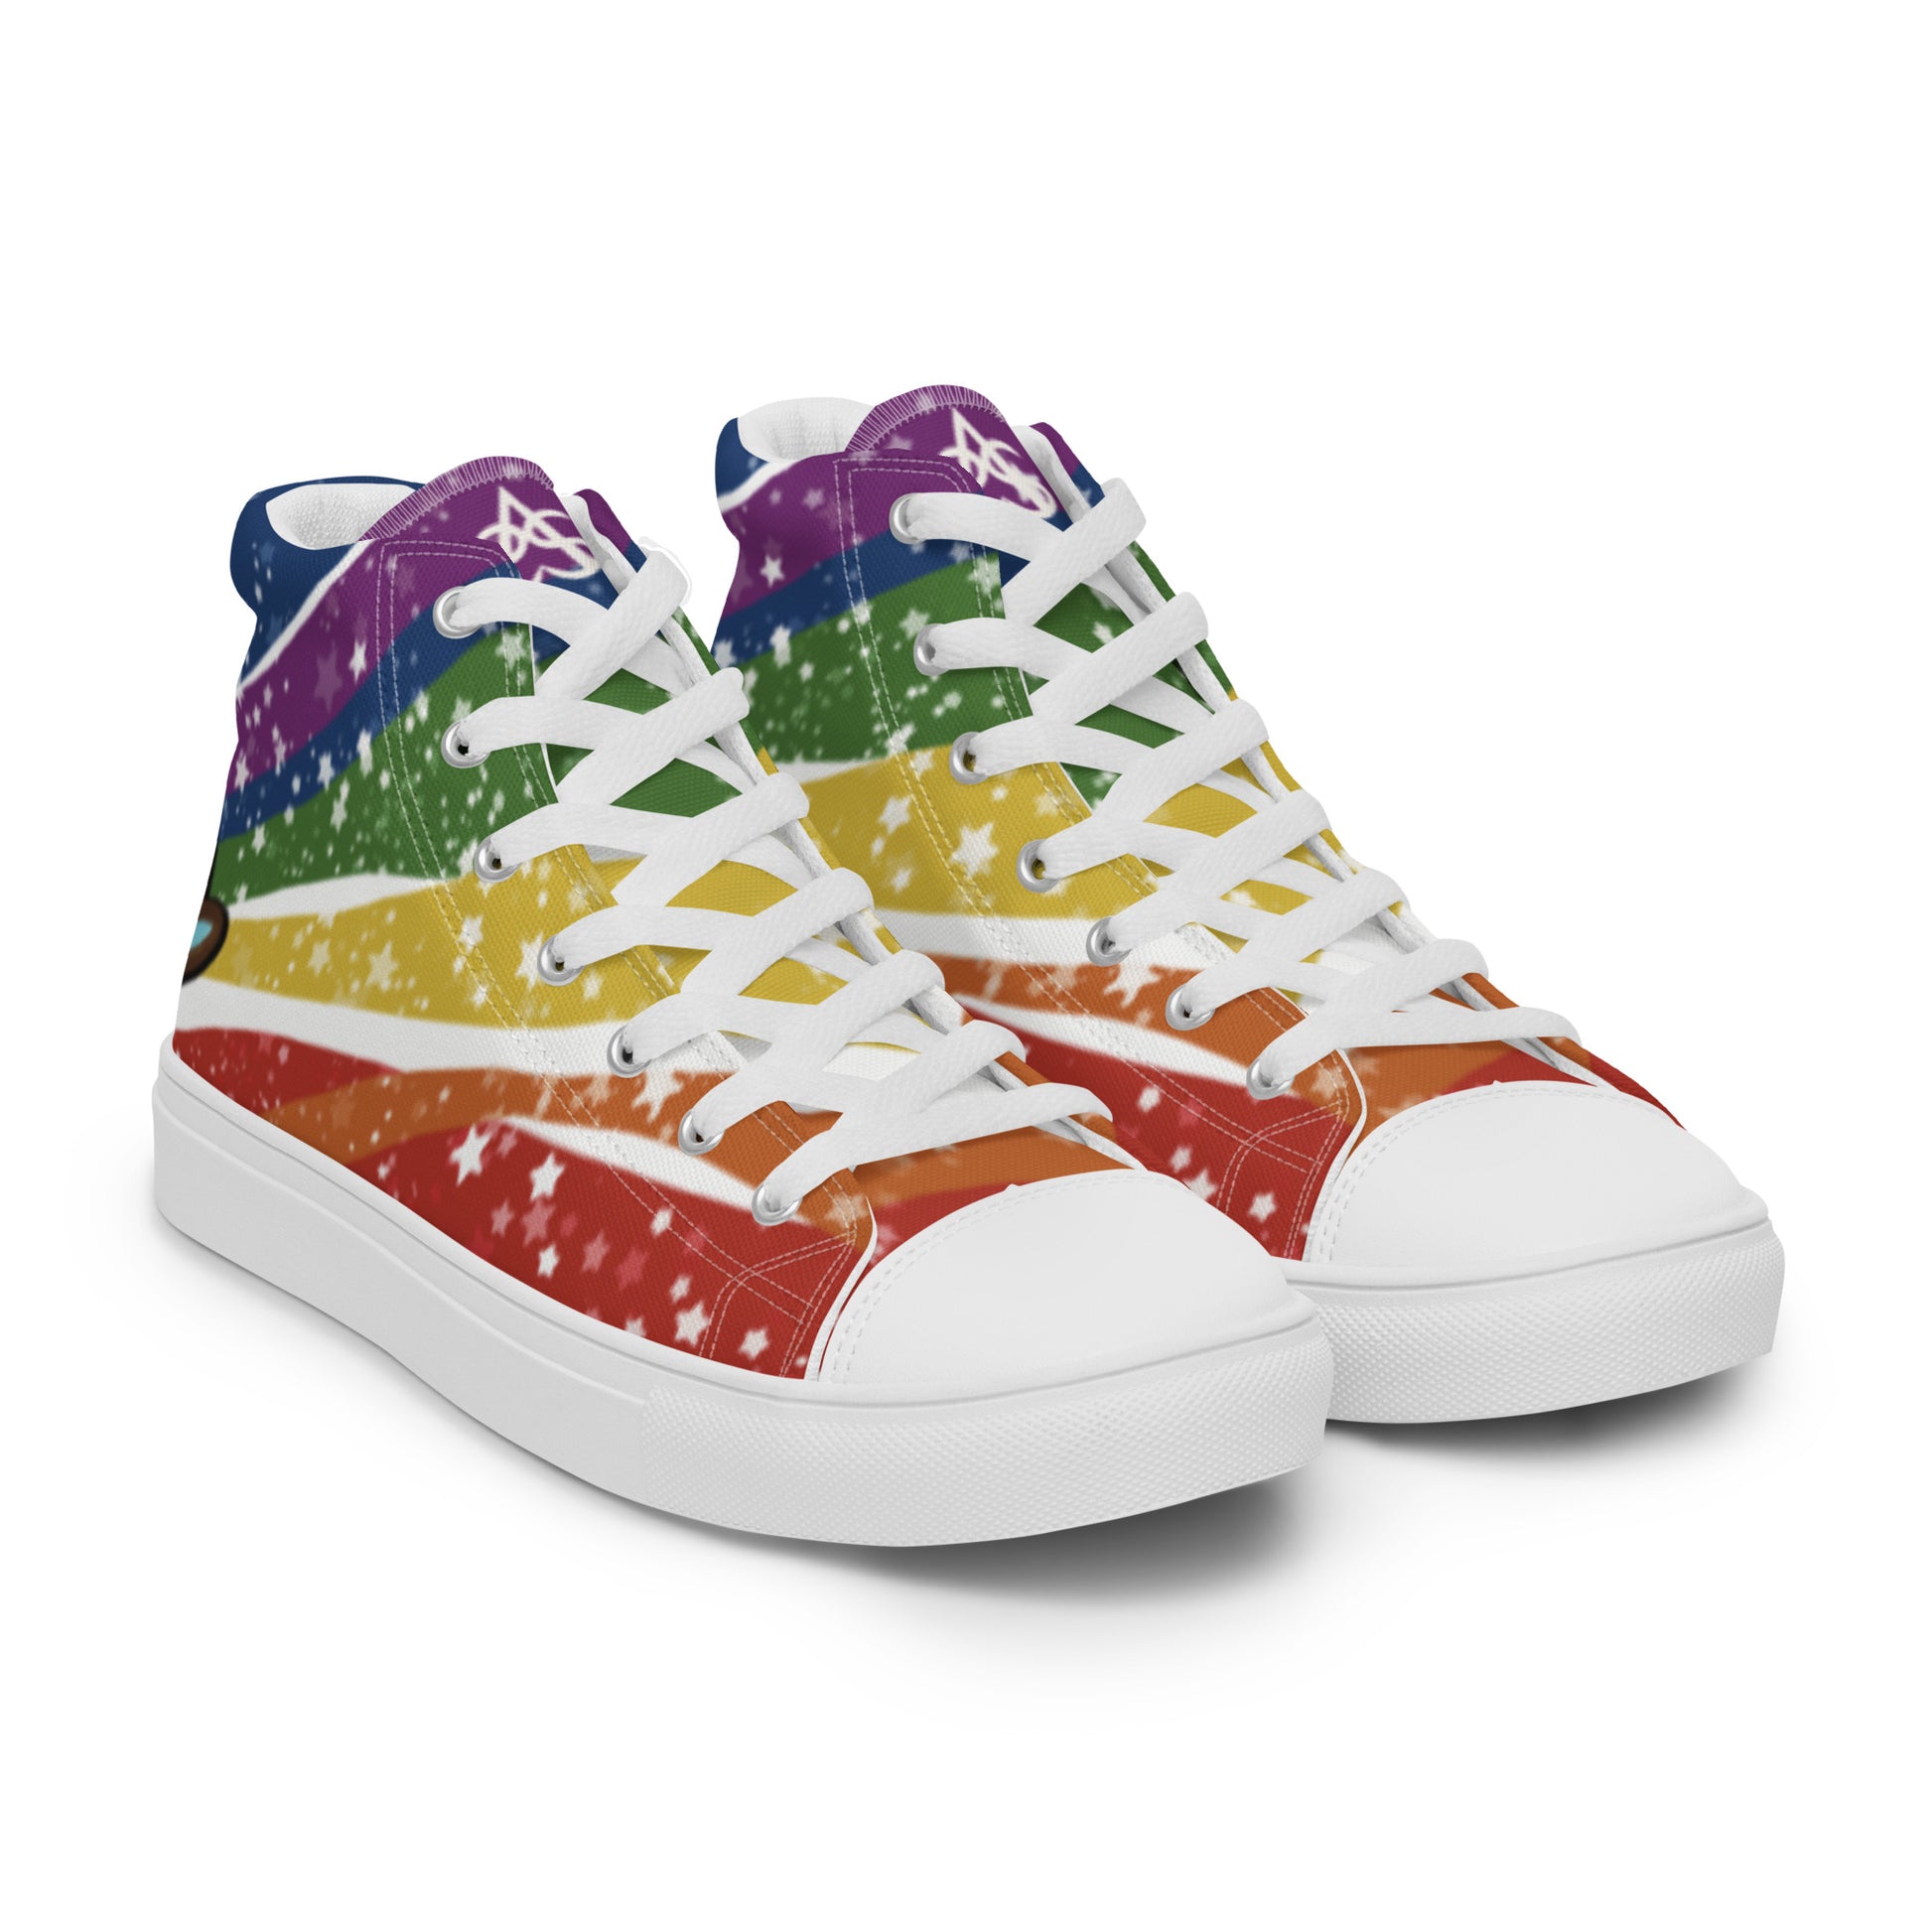 Right front view: A pair of high top shoes have wavy rainbow stripes coming from the heel and getting wider towards the laces, covered in stars, with a double heart in black and brown containing the Trans Pride flag near the heel.